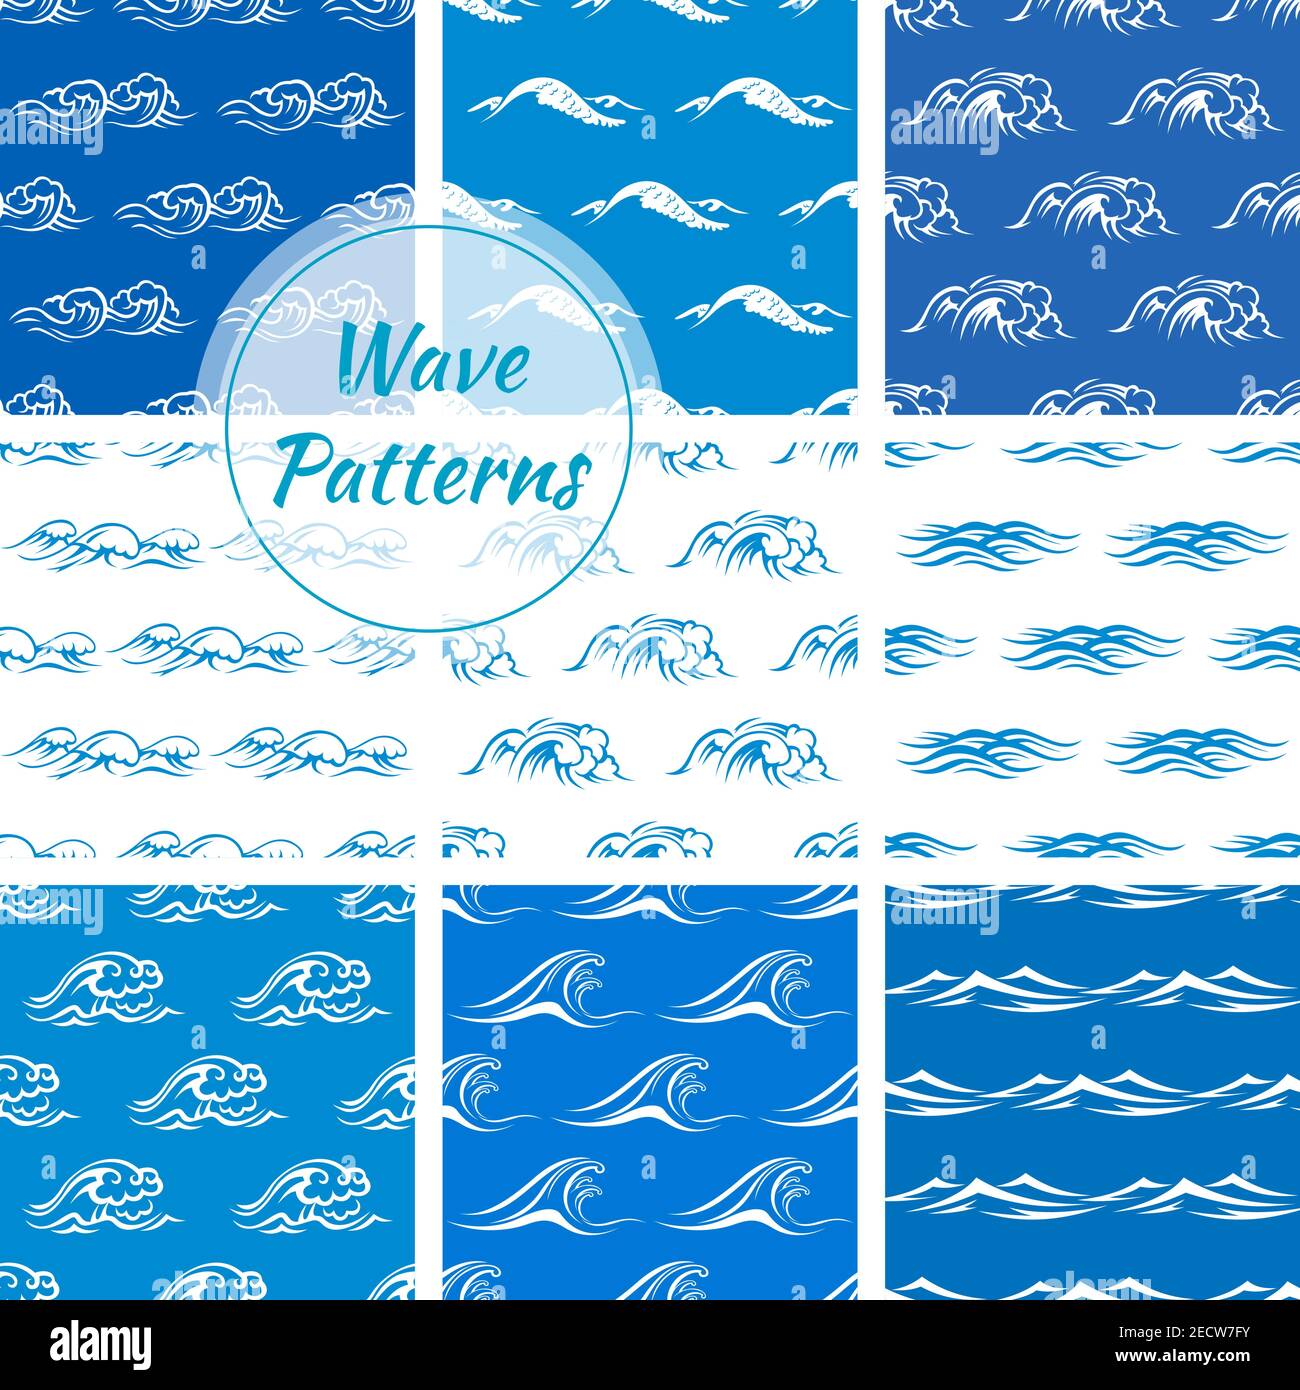 Waves pattern backgrounds. Wallpaper tiles with vector icons of blue and white ocean and sea waves. Tide, storm, wind, foamy wave elements Stock Vector